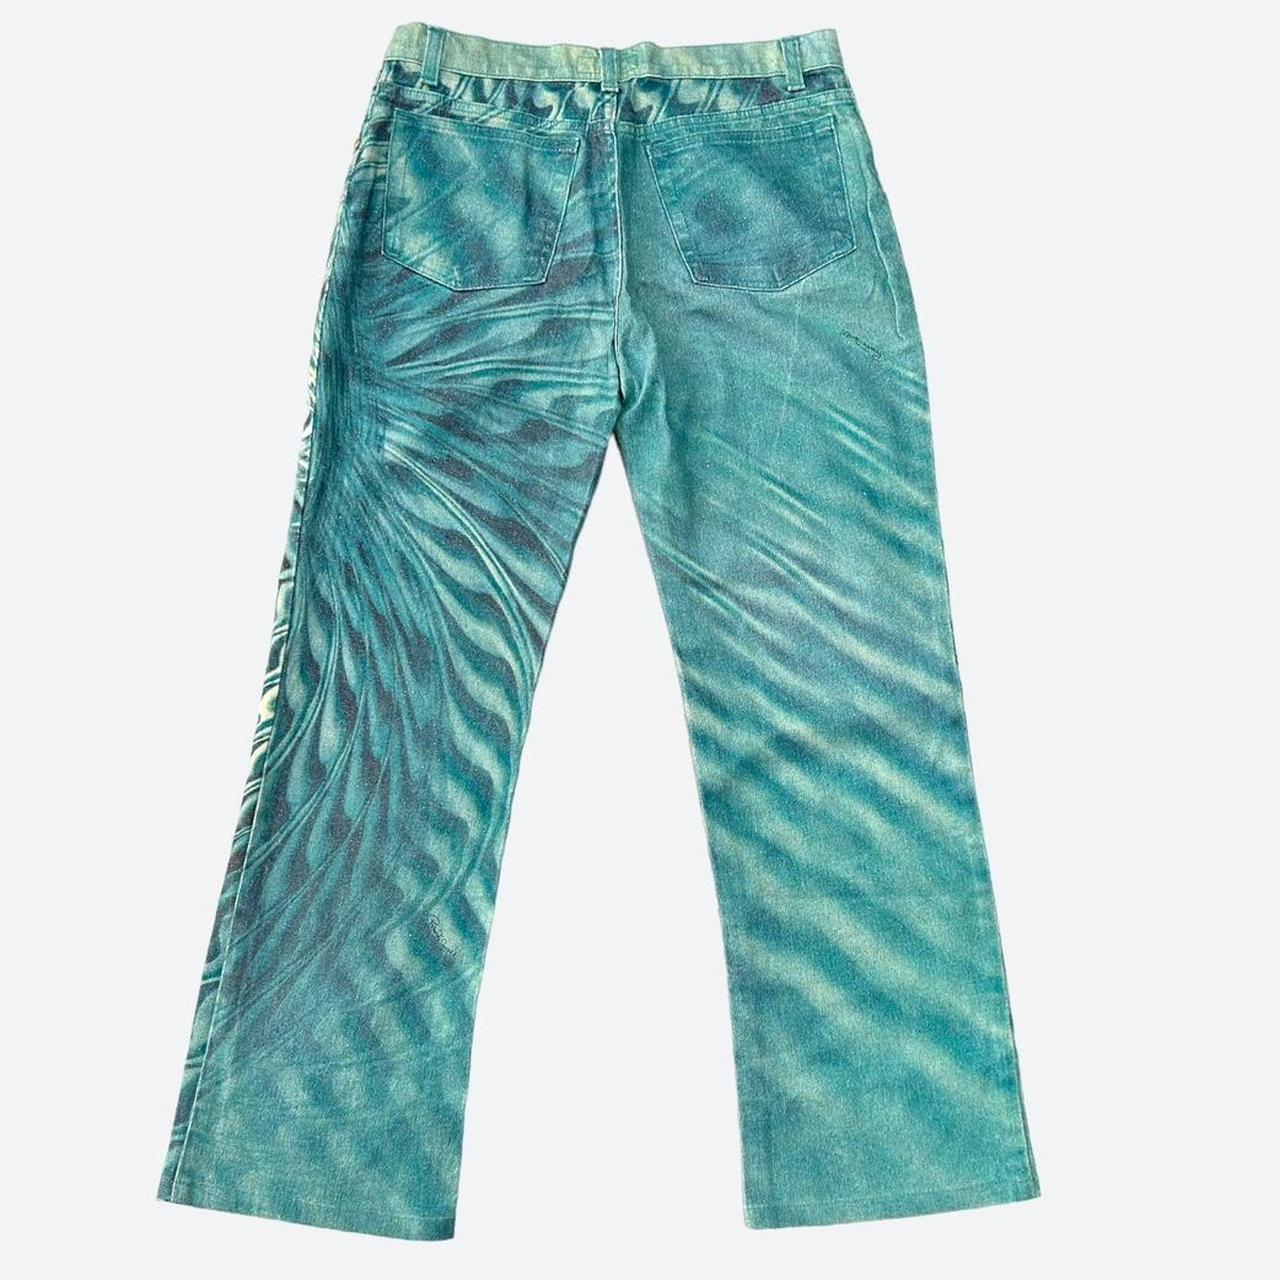 The uniquely hypnotic and somewhat aquatic feel of these teal blue pants instantly transports one back to the beginning of the millennium, brilliantly encapsulating the playful, energetic and cyber centered aesthetic of the time.

The 2% elastane to